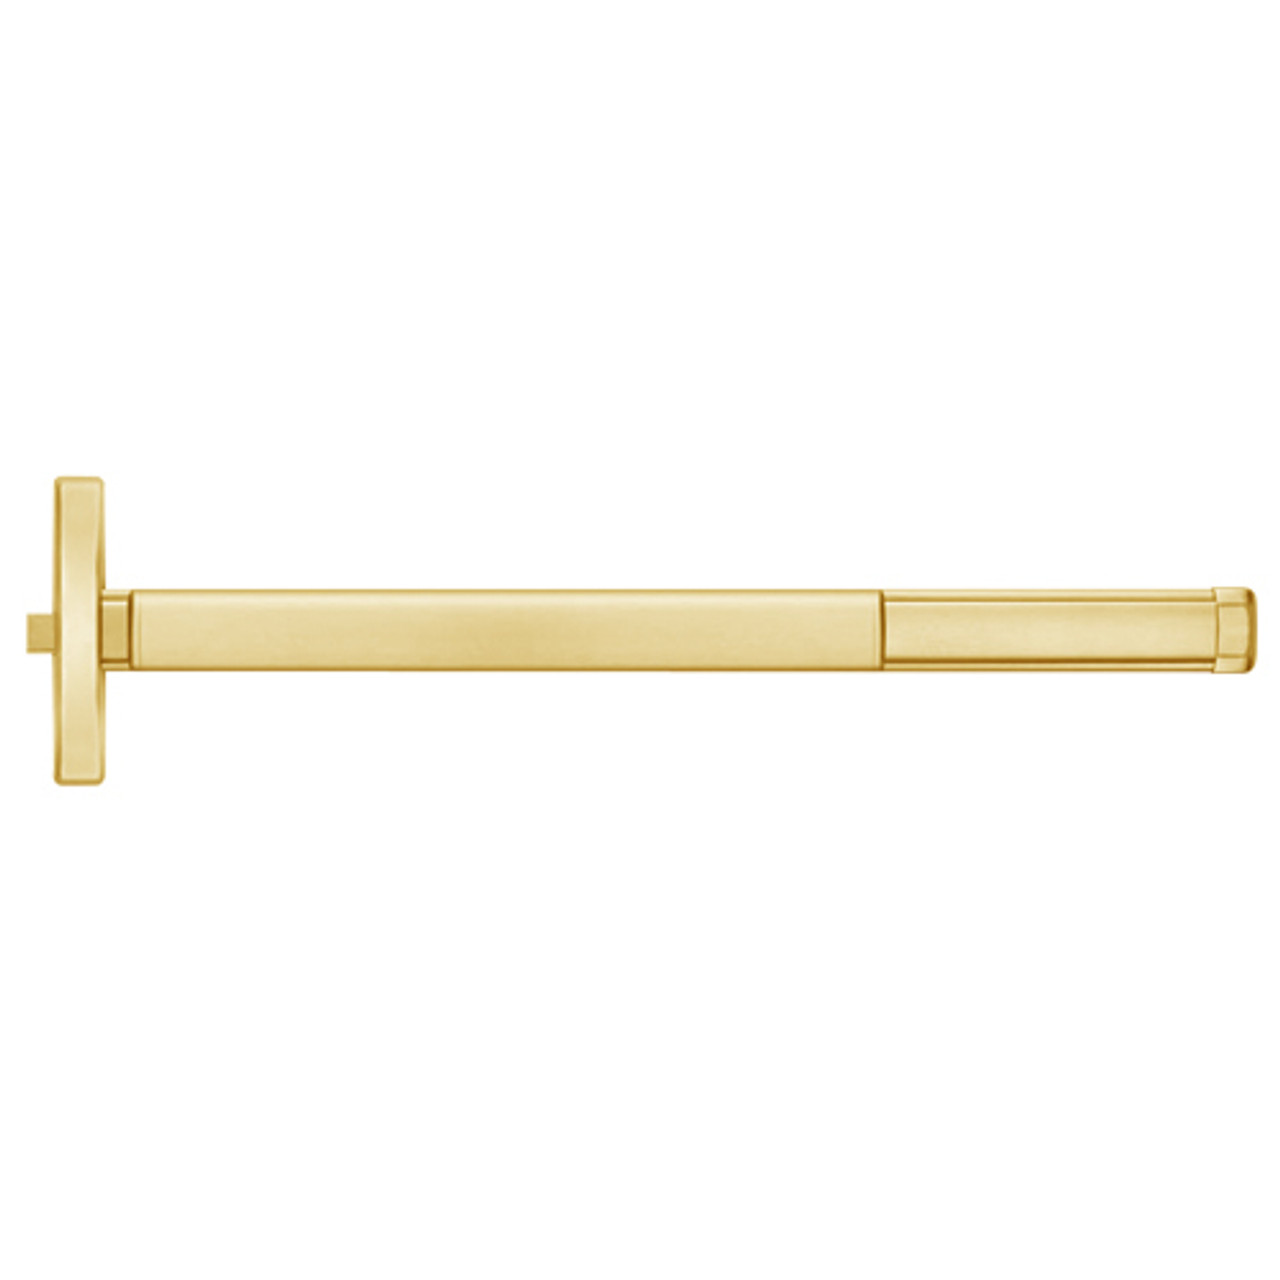 TSFL2408-605-48 PHI 2400 Series Fire Rated Apex Rim Exit Device with Touchbar Monitoring Switch Prepped for Key Controls Lever in Bright Brass Finish